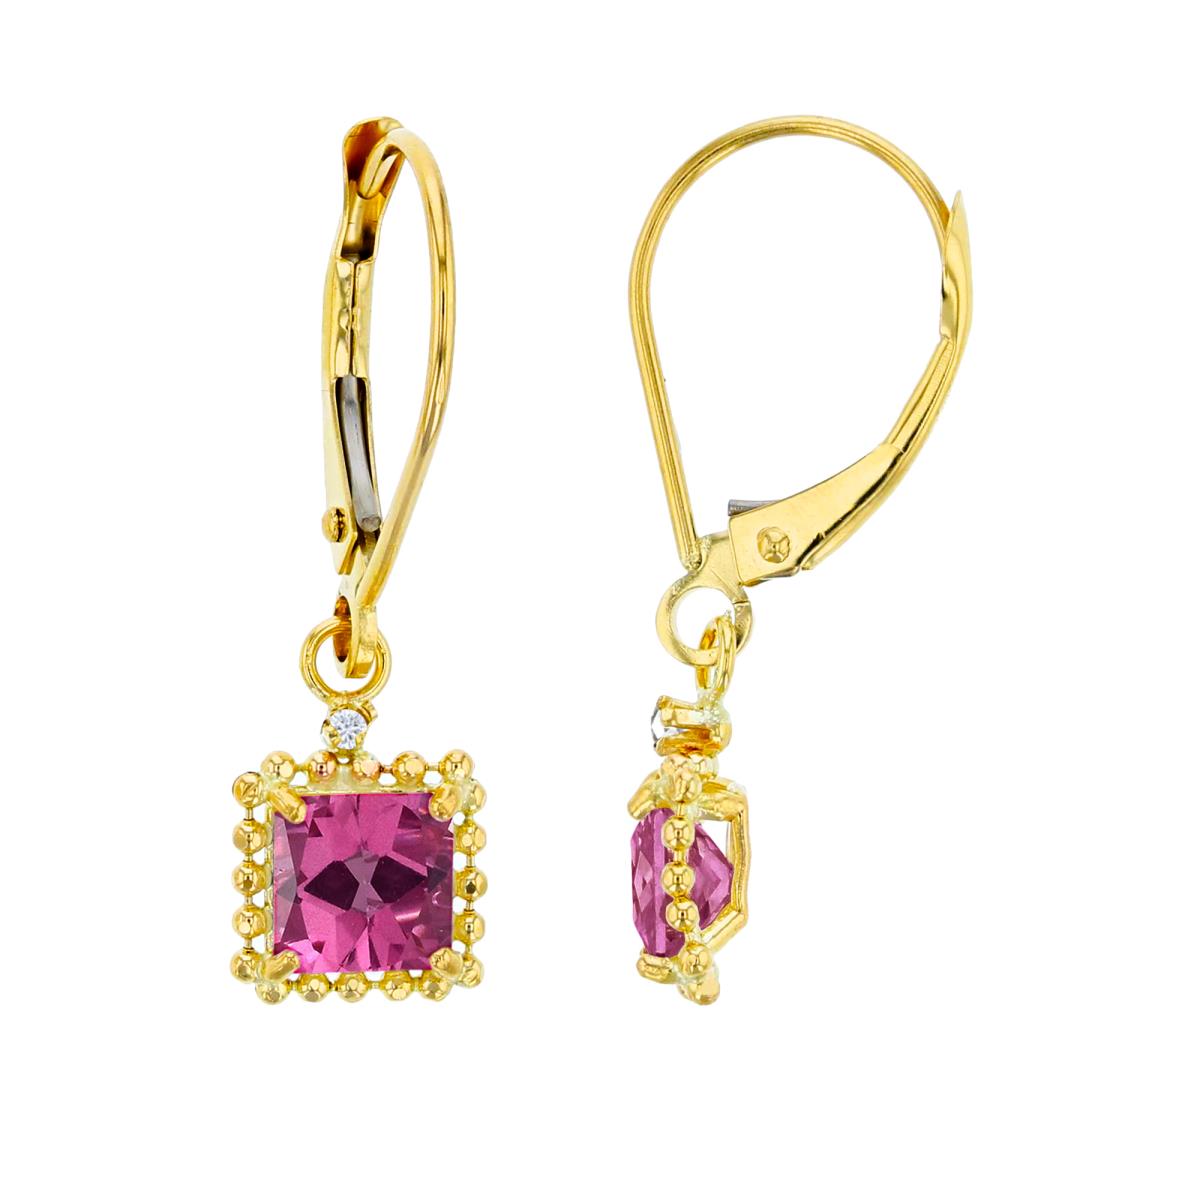 10K Yellow Gold 1.25mm Rd White Topaz & 5mm Sq Pure Pink Bead Frame Drop Lever-Back Earring